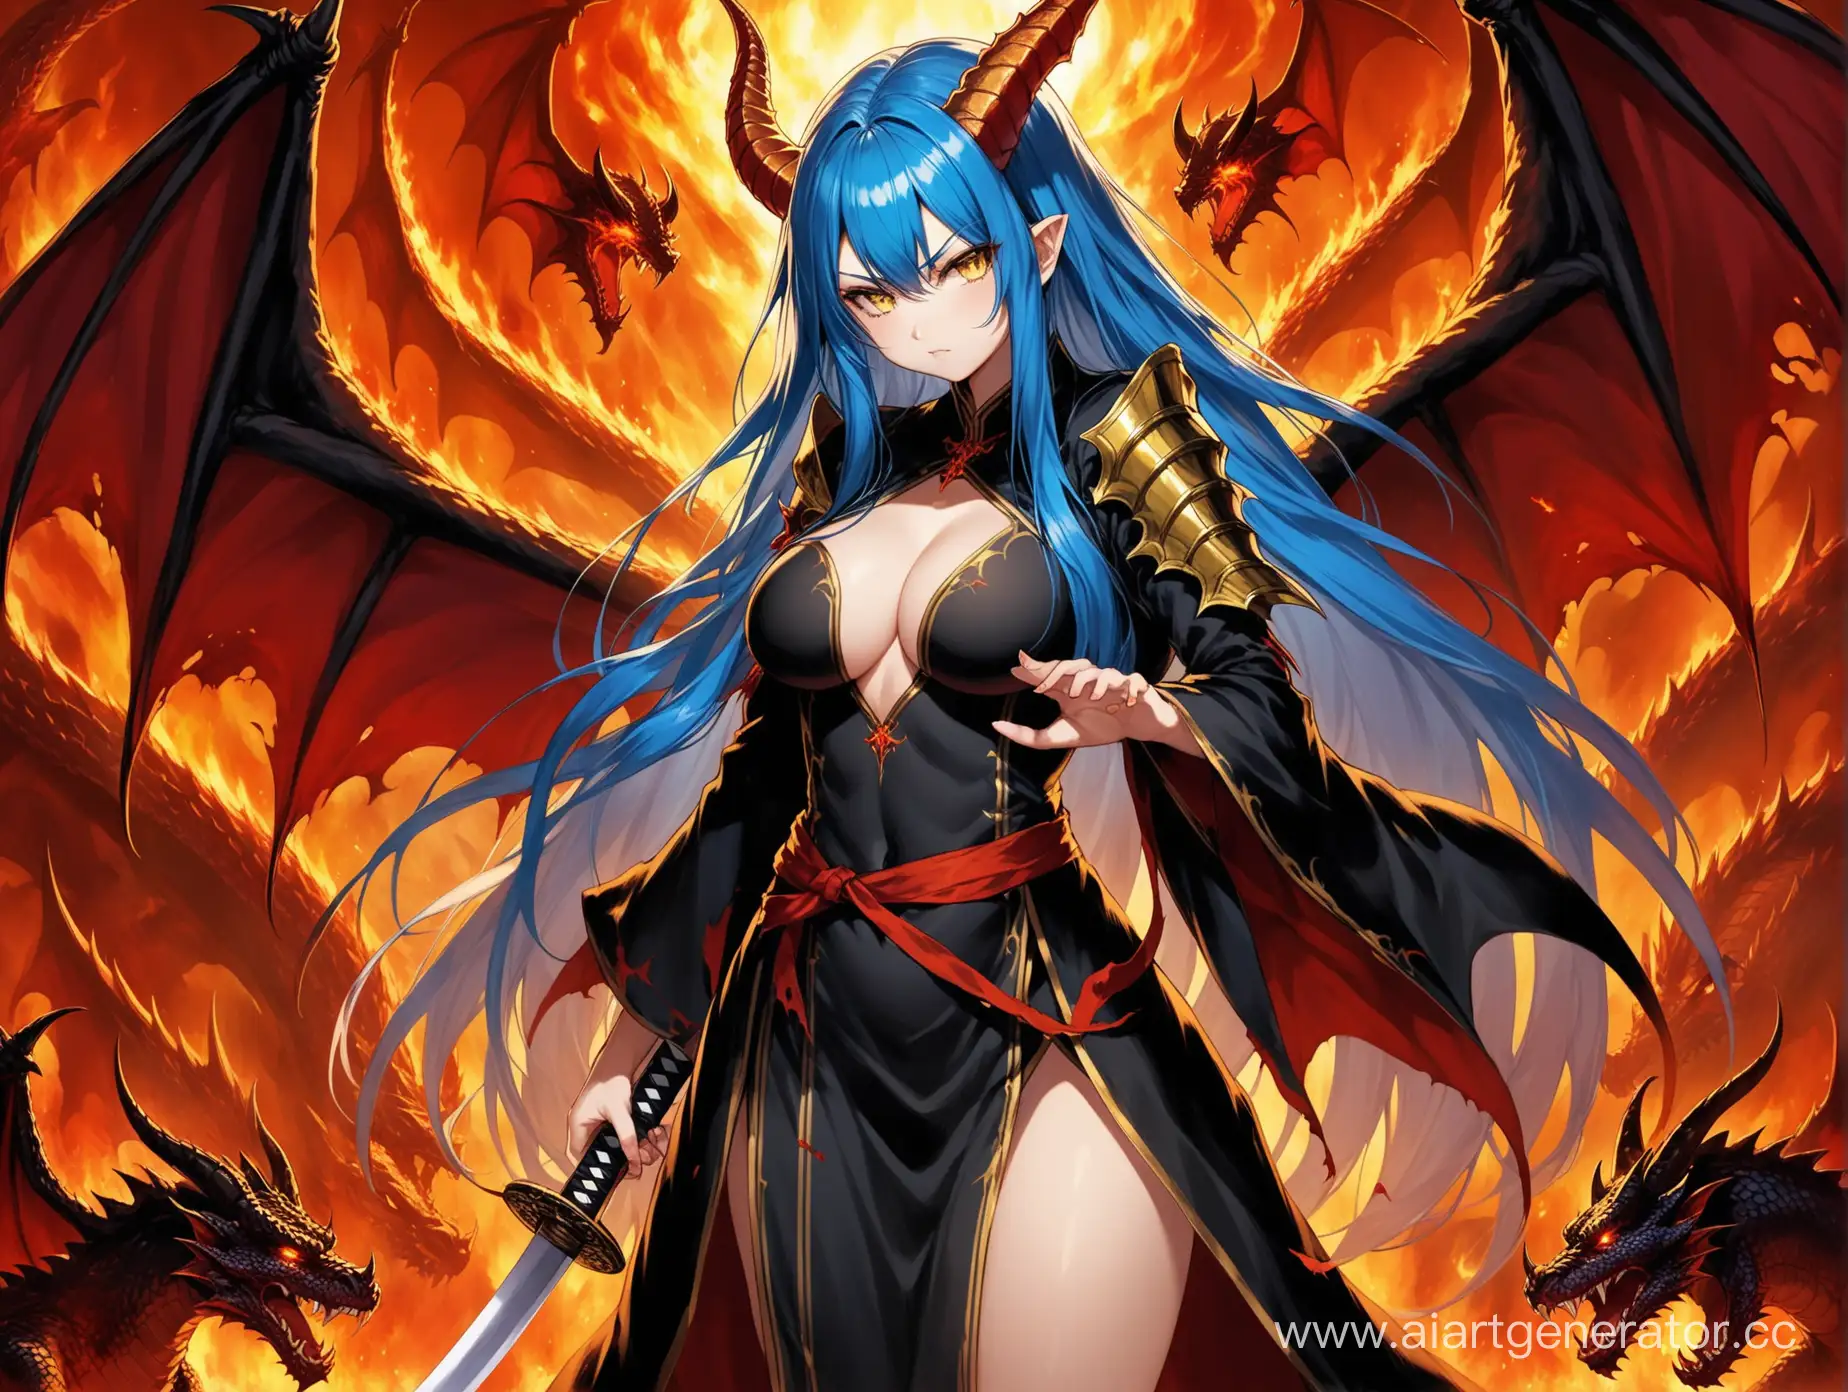 Sinister-Angel-BlueHaired-Demoness-Wielding-Bloodied-Katana-in-Hellish-Lair